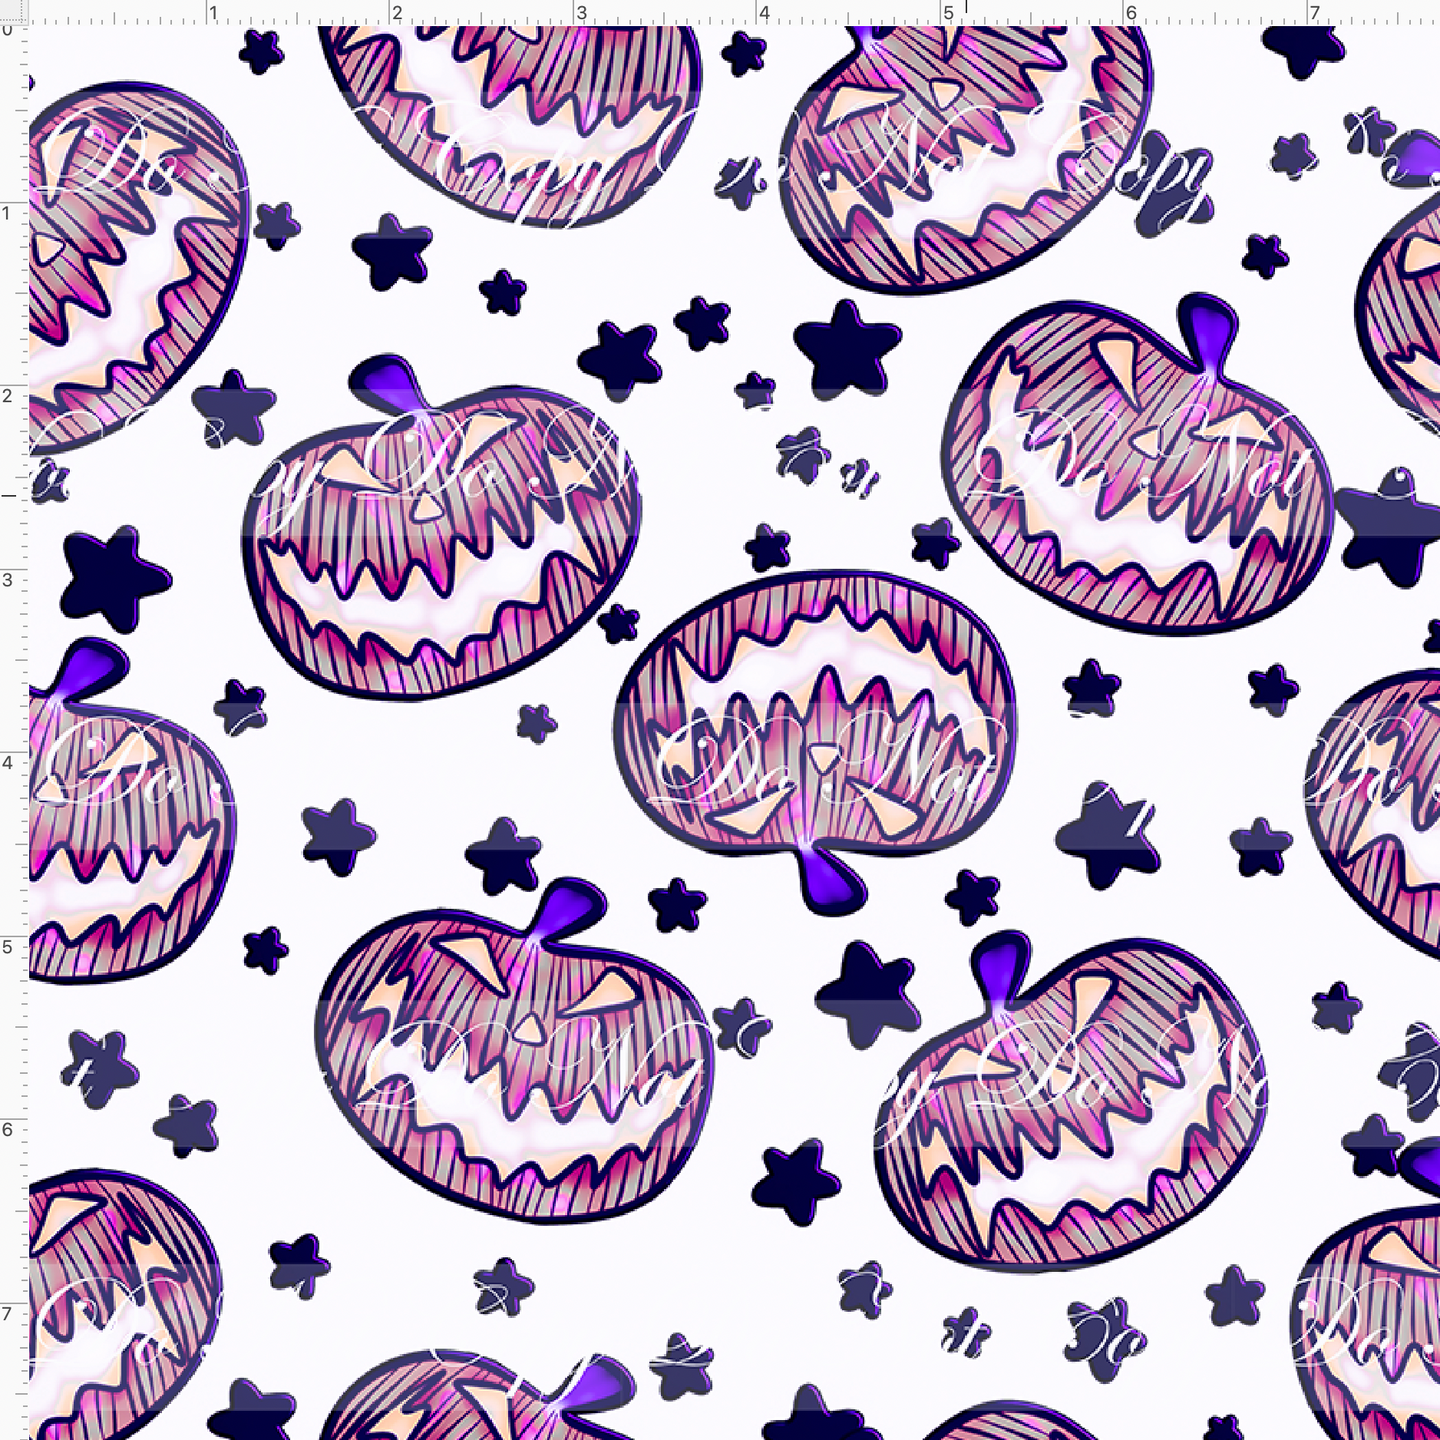 CATALOG - PREORDER - Glowing NBC - Pumpkins - Purple - White Background - SMALL SCALE